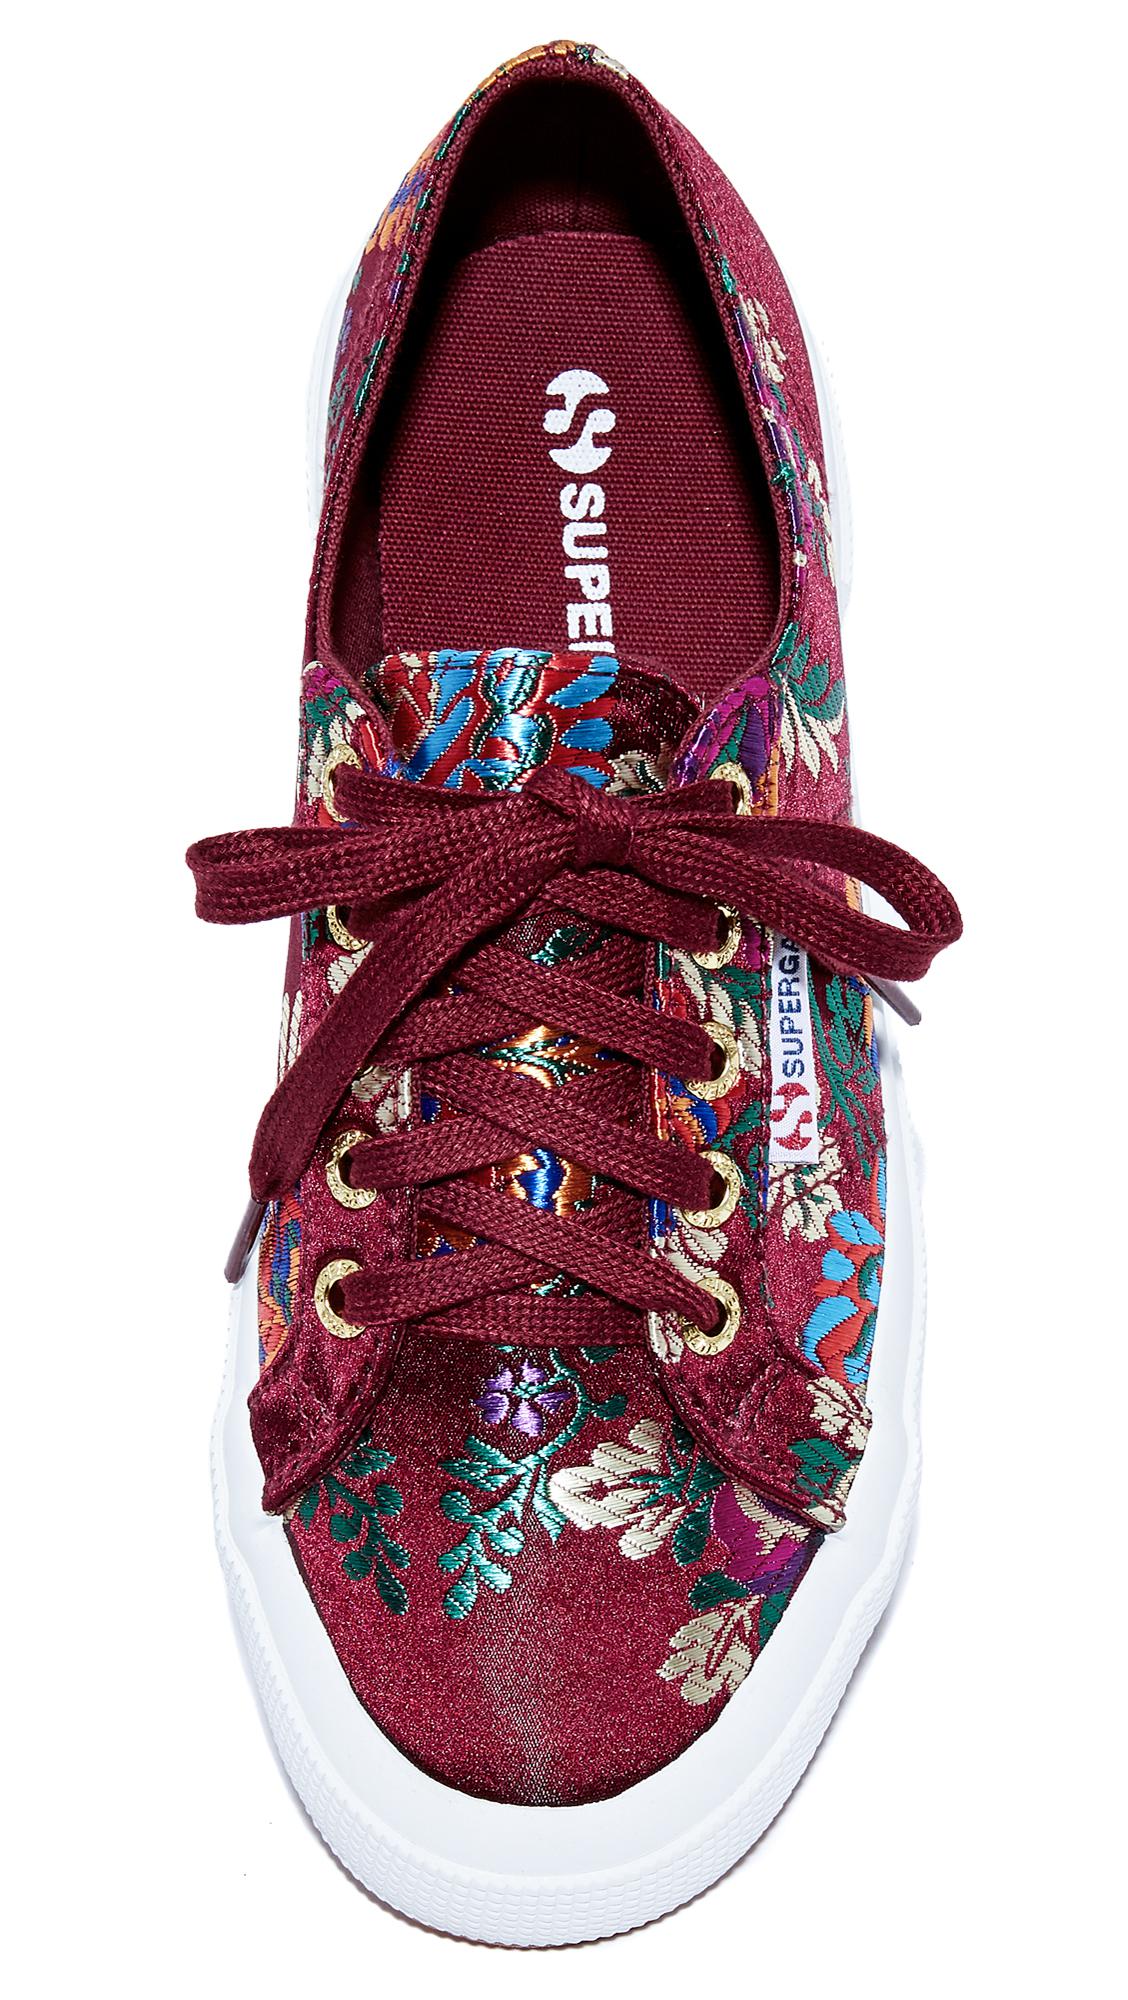 Superga 2750 Flowery Satin Satin Low-Top Lace-Up Womens Trainers 